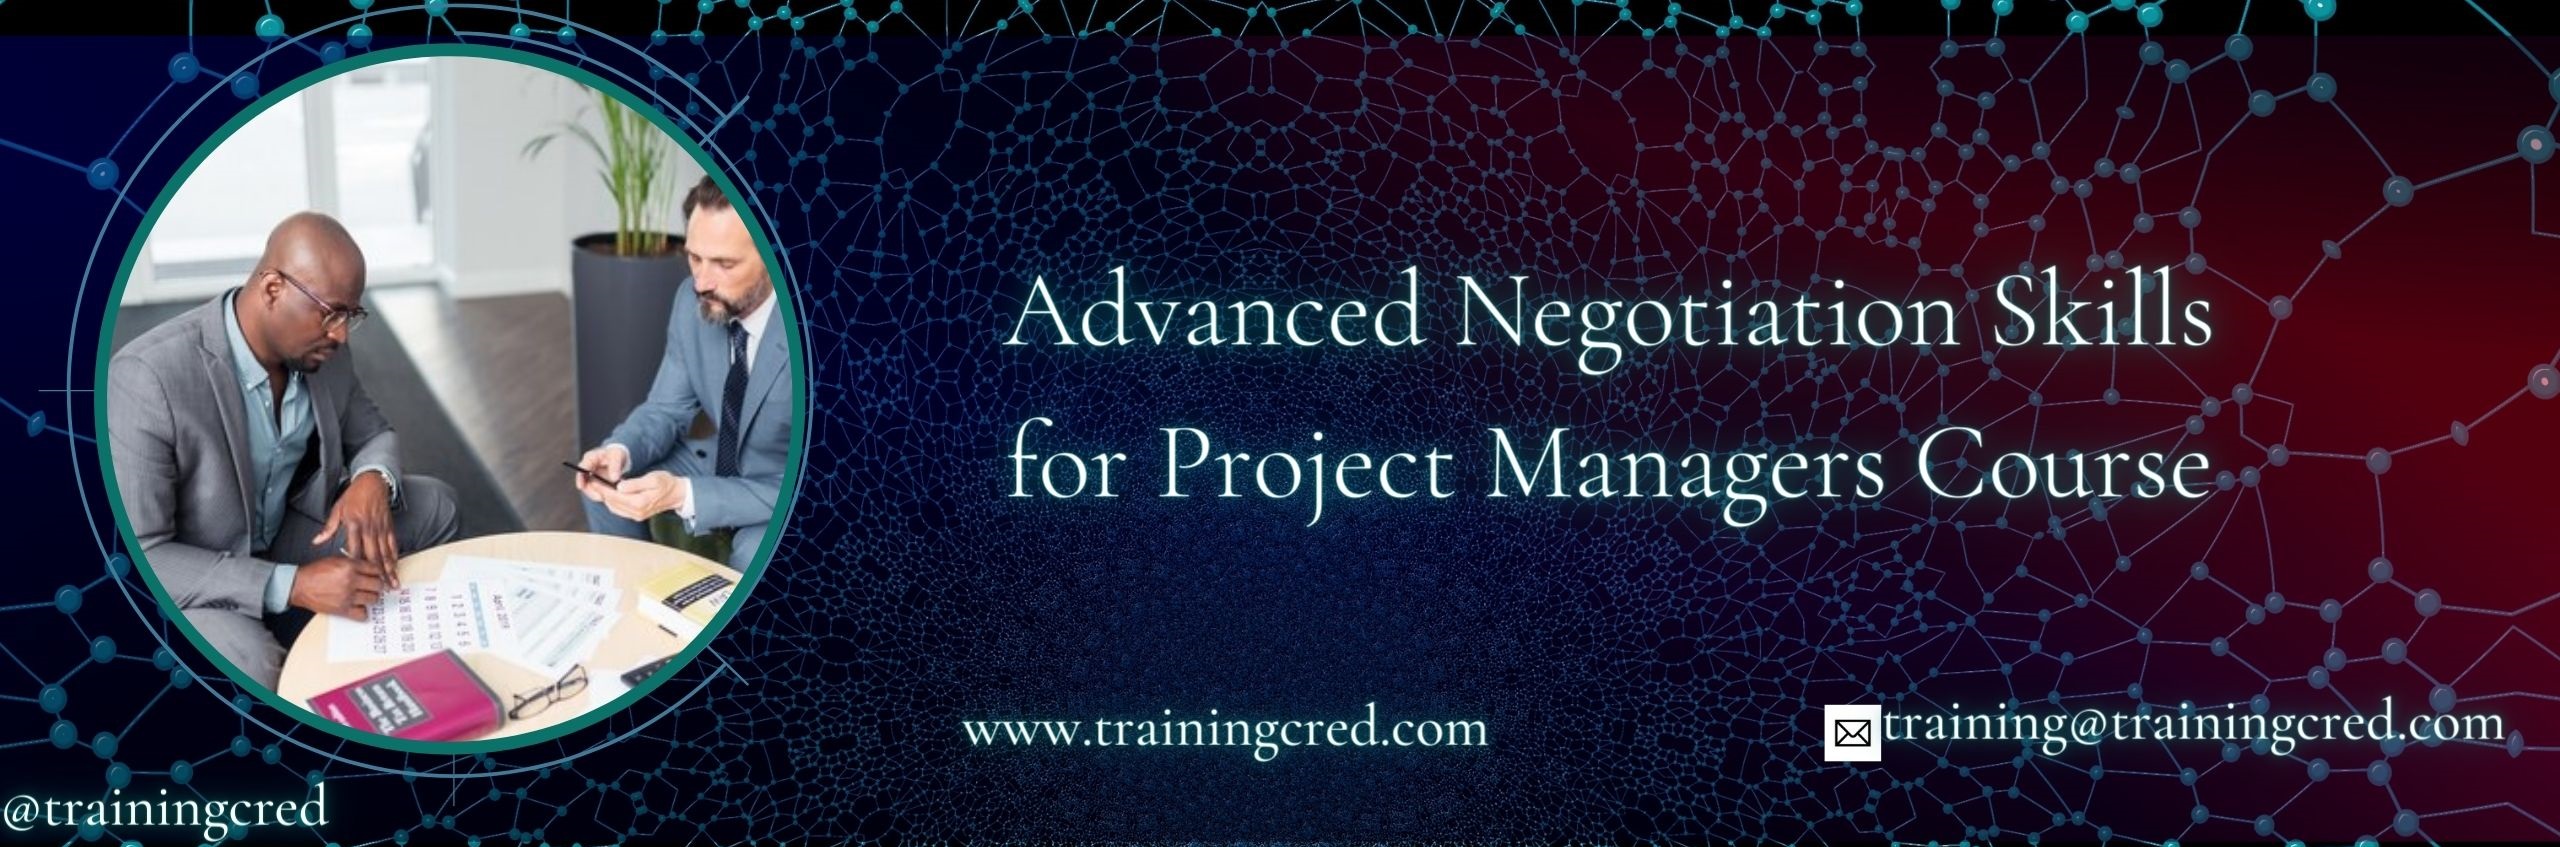 Advanced Negotiation Skills for Project Managers Training